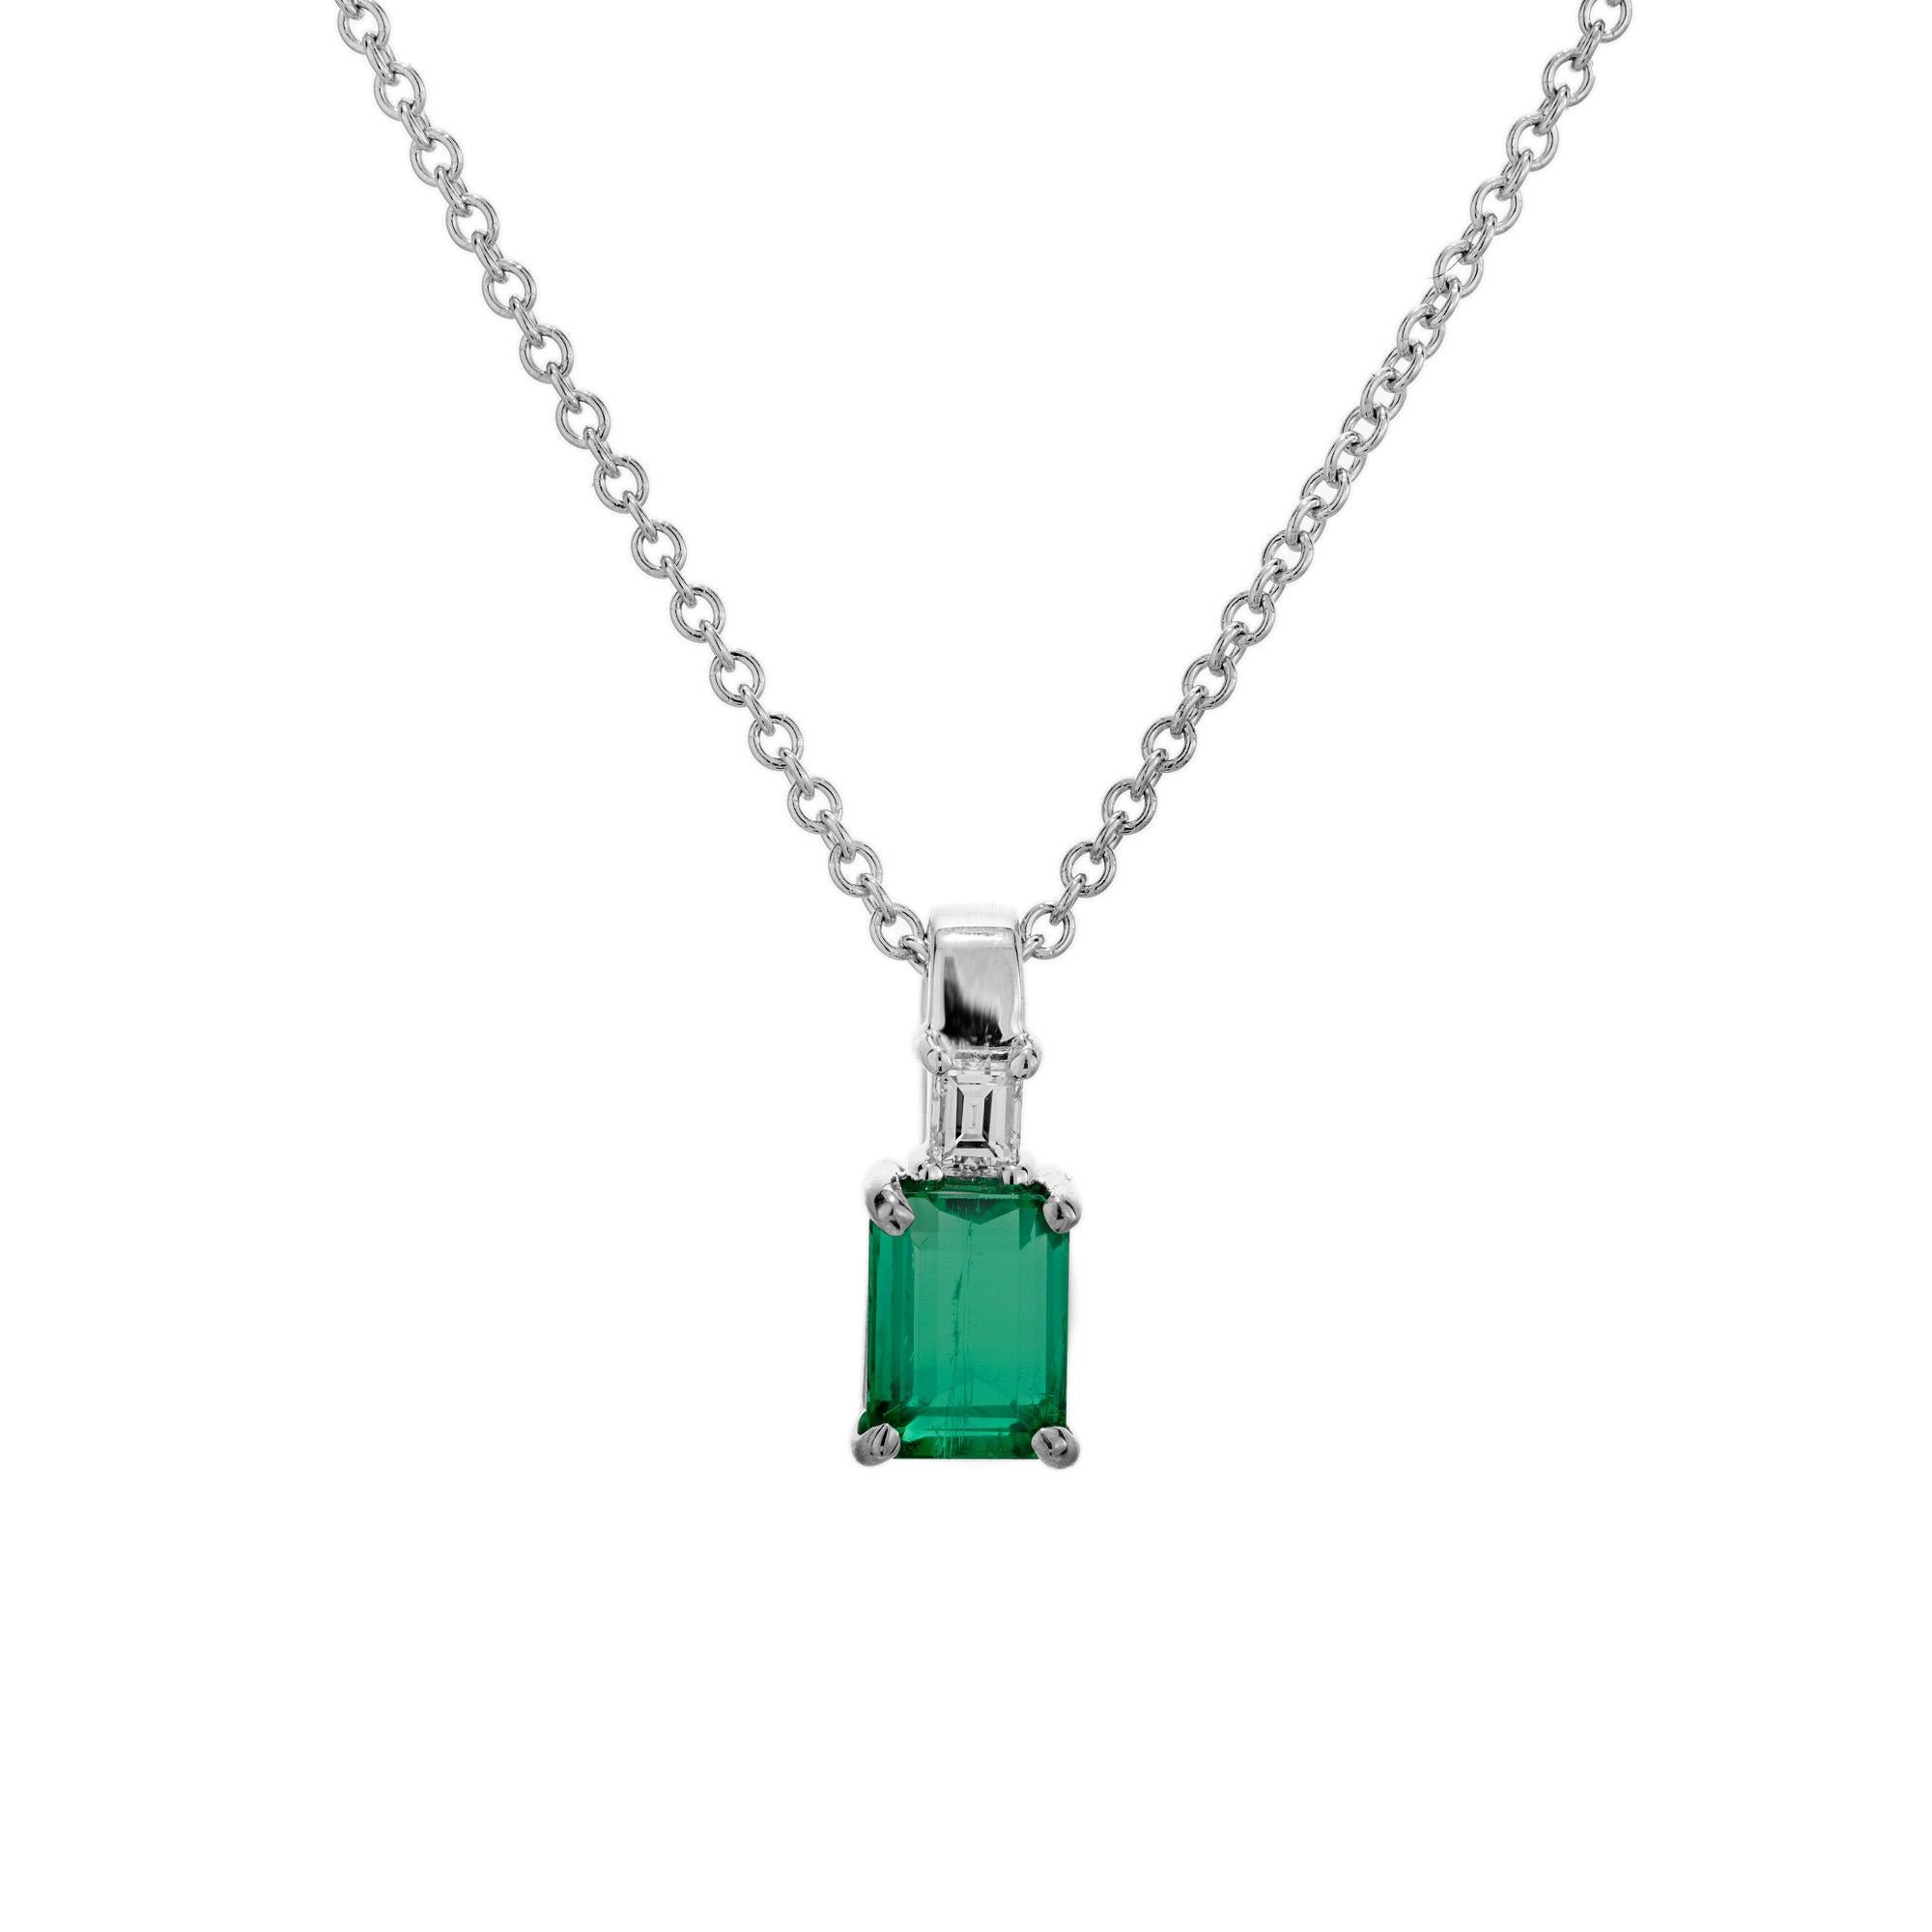 Natural GIA Certified Emarald and diamond pendant necklace. GIA certified .84 carat octagonal emerald set in a simple 4 prong 14k white gold setting, accented with 1 step cut square diamond. 18 inch 14k white gold chain. Designed and crafted in the